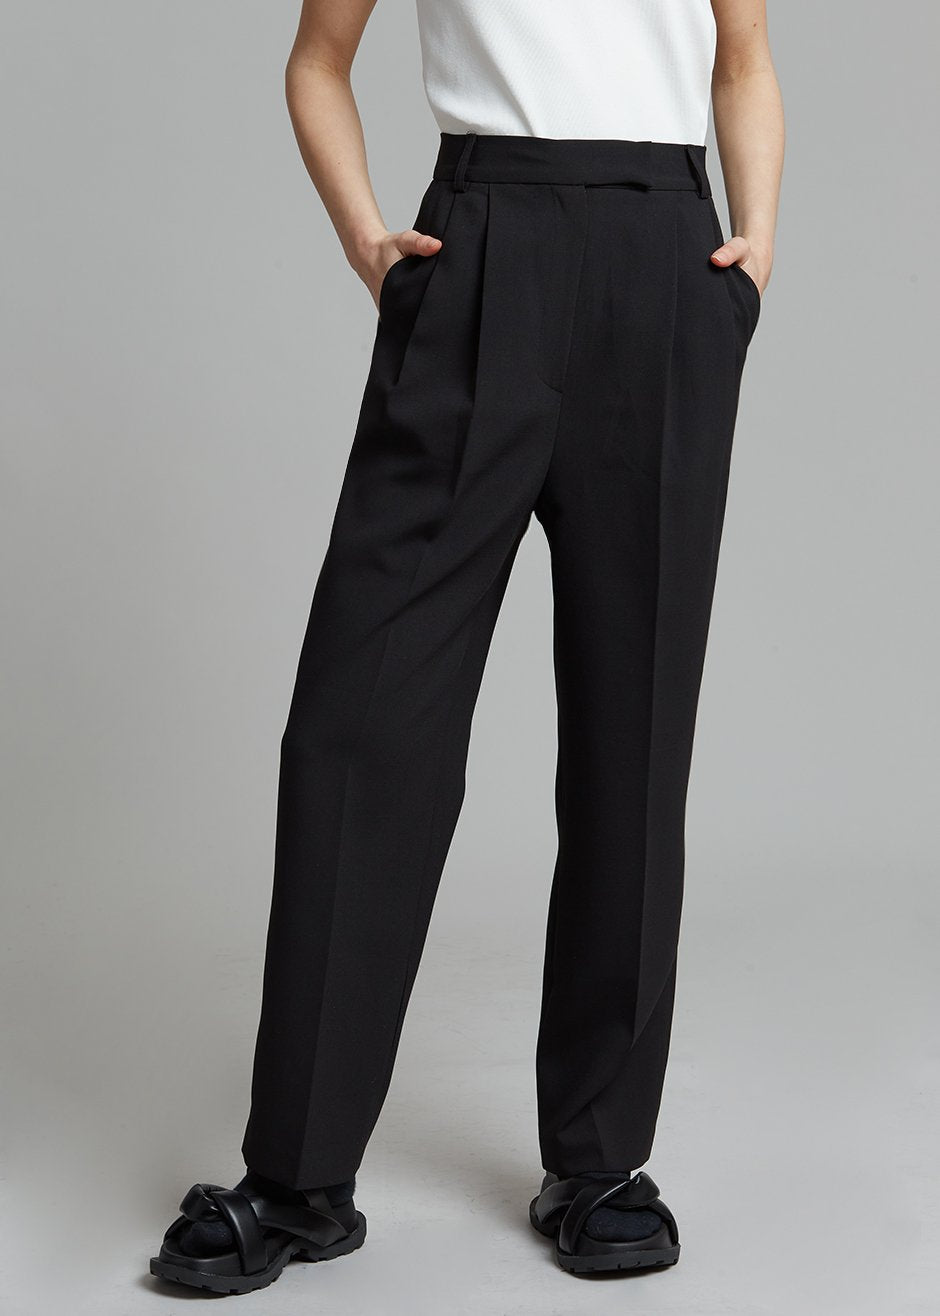 Strictly Business Black High Waisted Trouser Pants